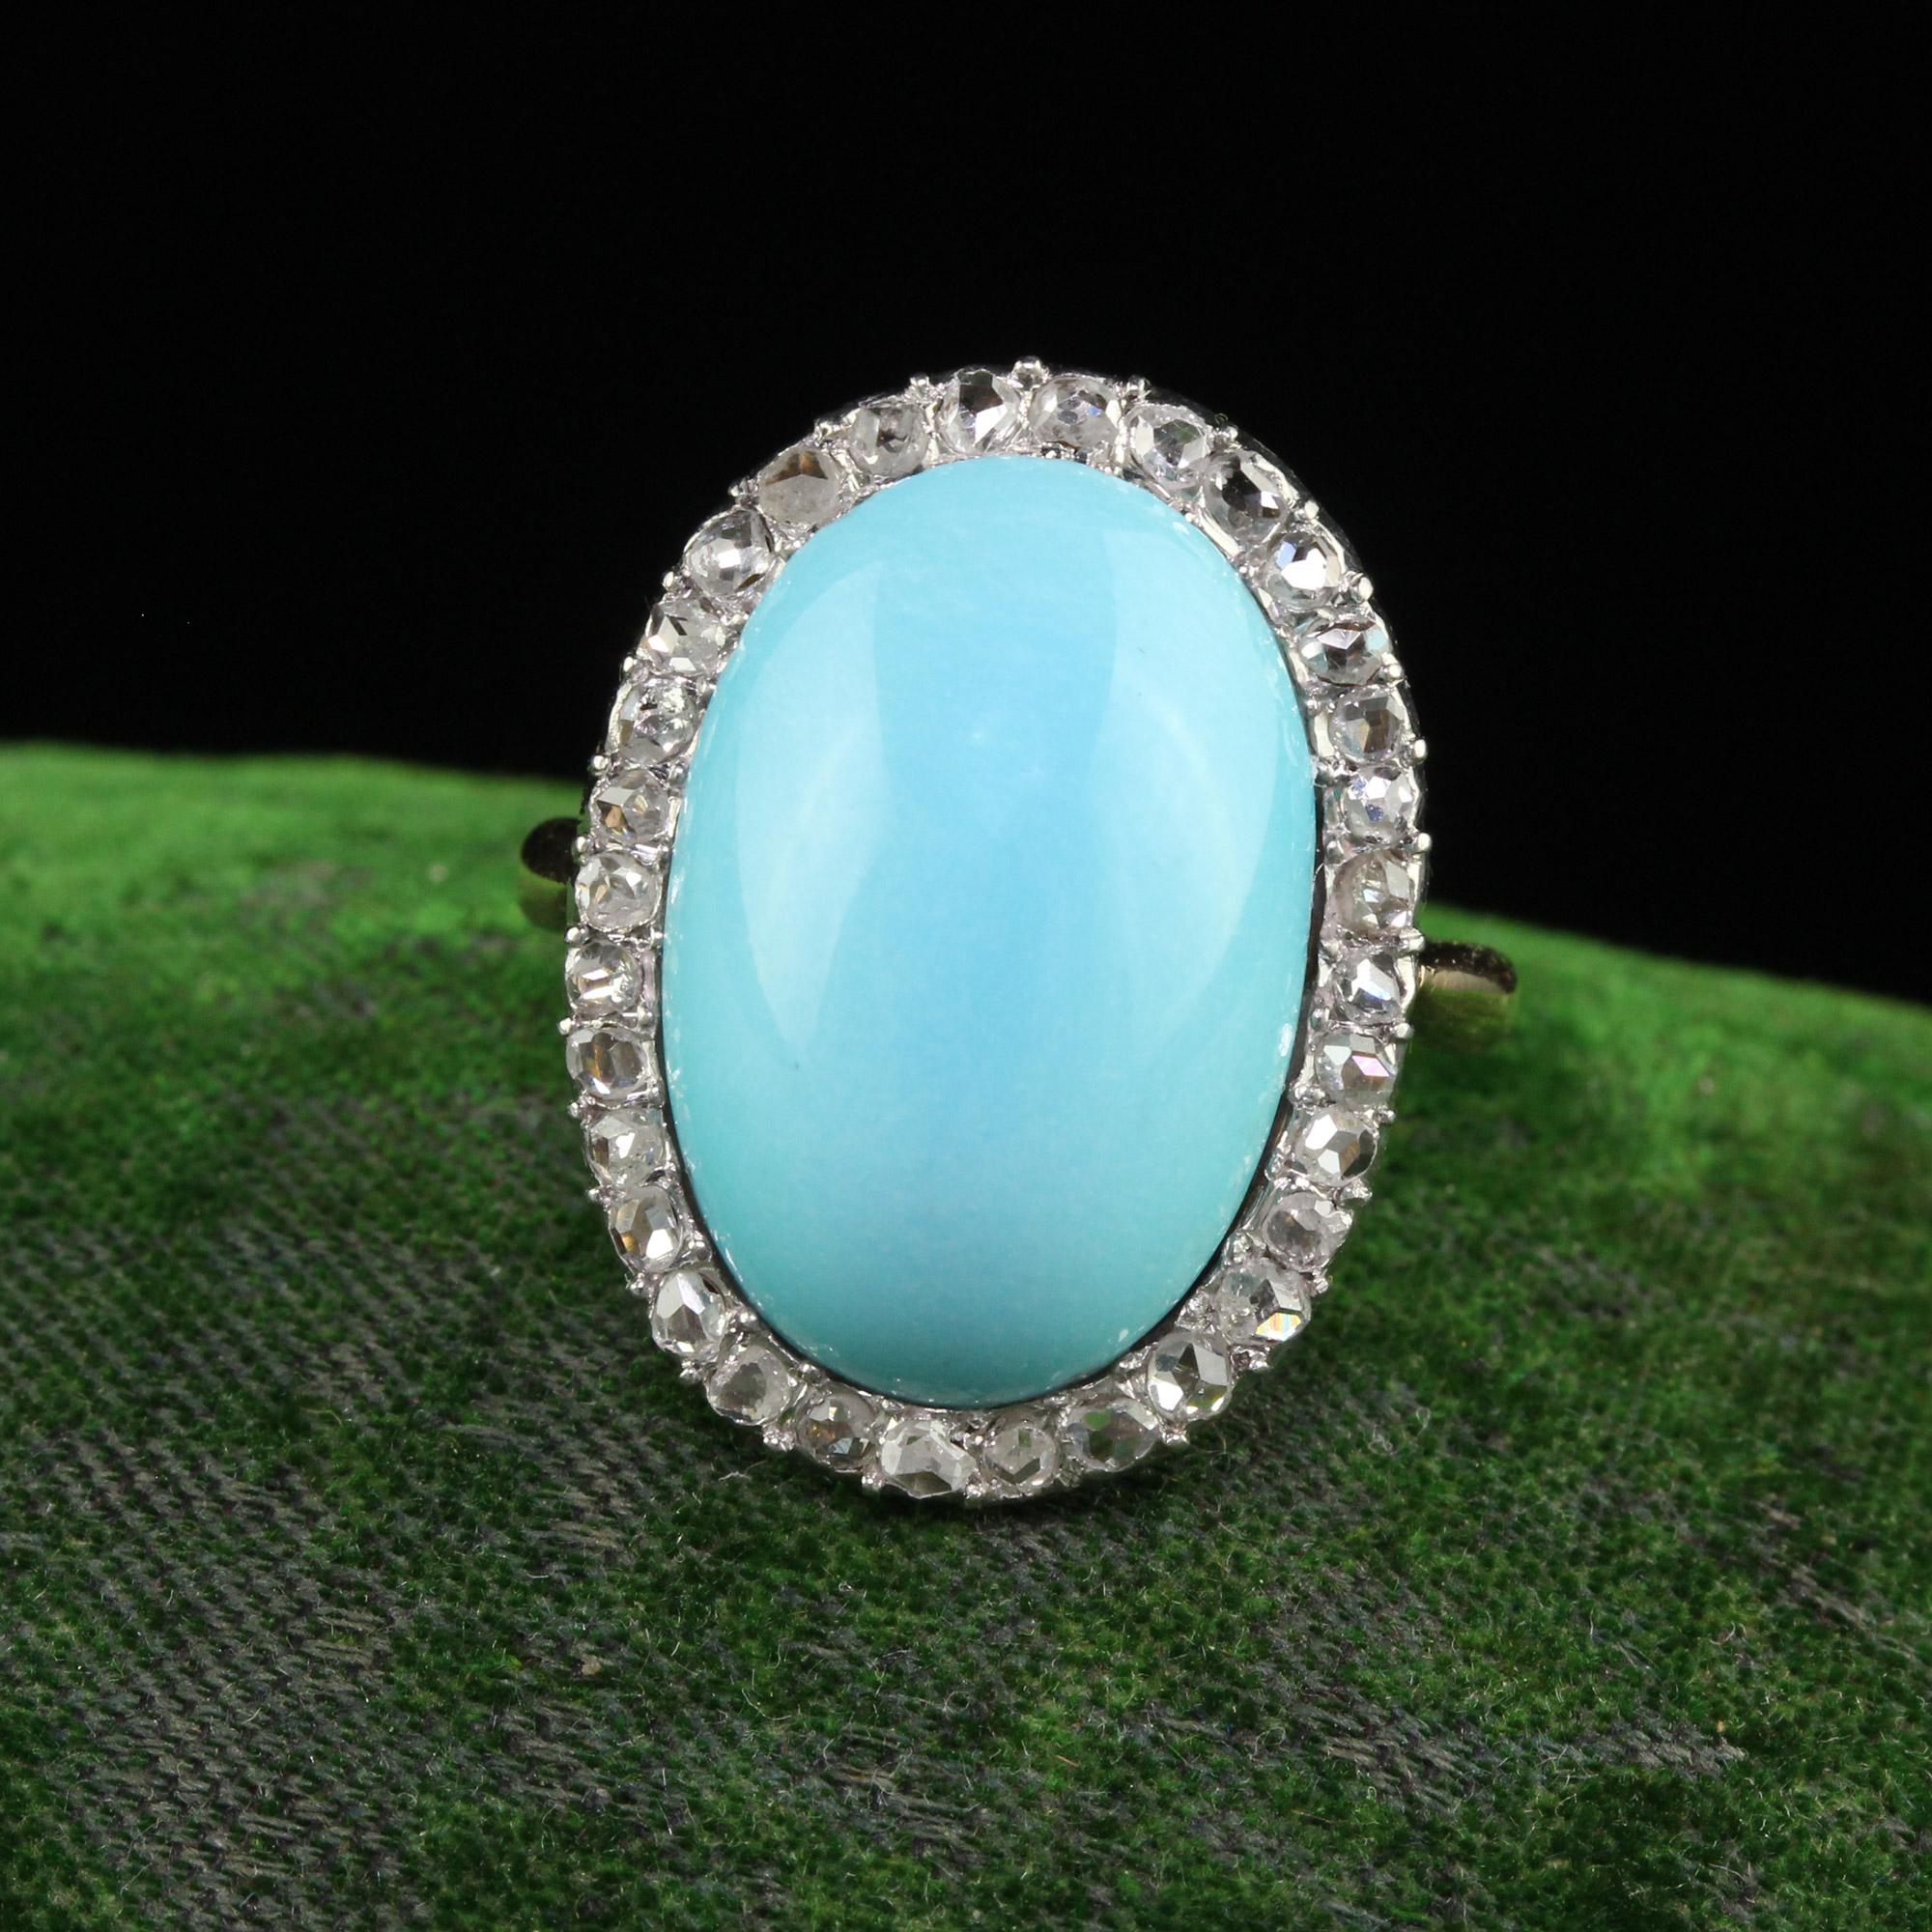 Beautiful Antique Edwardian French 18K Yellow Gold Rose Cut Diamond Turquoise Cocktail Ring. This gorgeous French cocktail ring is crafted in 18k yellow gold and platinum top. The center holds a natural cabochon turquoise and has a halo of beautiful